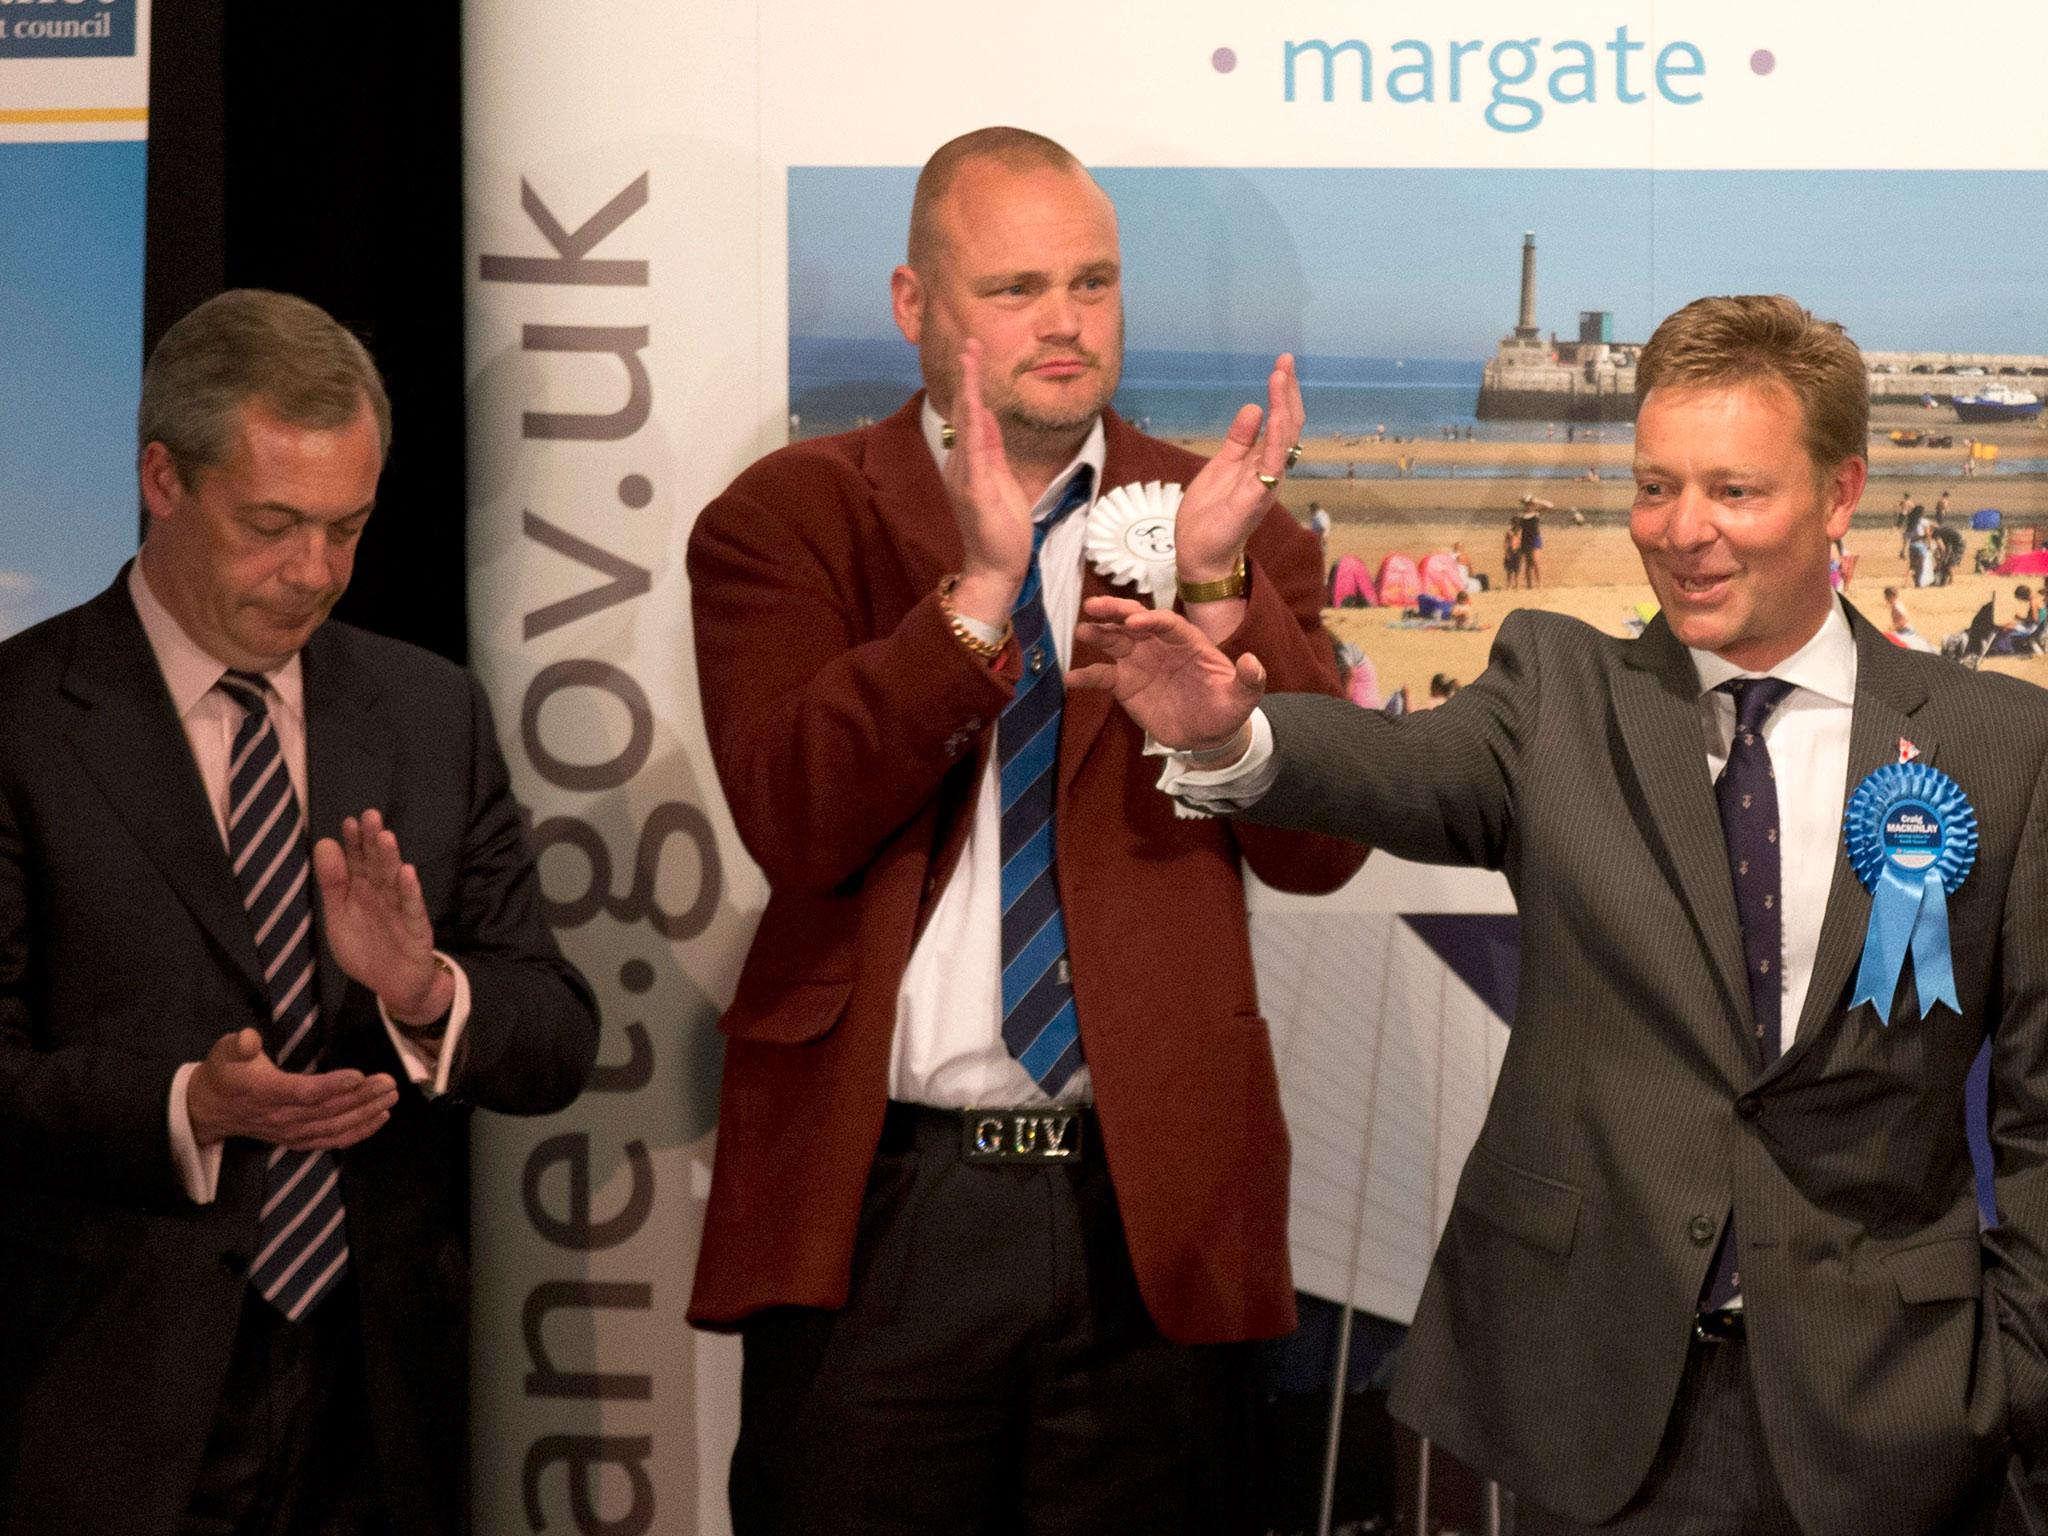 The Conservative Party's Craig Mackinlay, right, waves after winning the count for the South Thanet seat beside, from left, Nigel Farage the leader of the UK Independence Party (UKIP) and Al Murray a comedian who performs as "The Pub Landlord" at the Winter Gardens in Margate